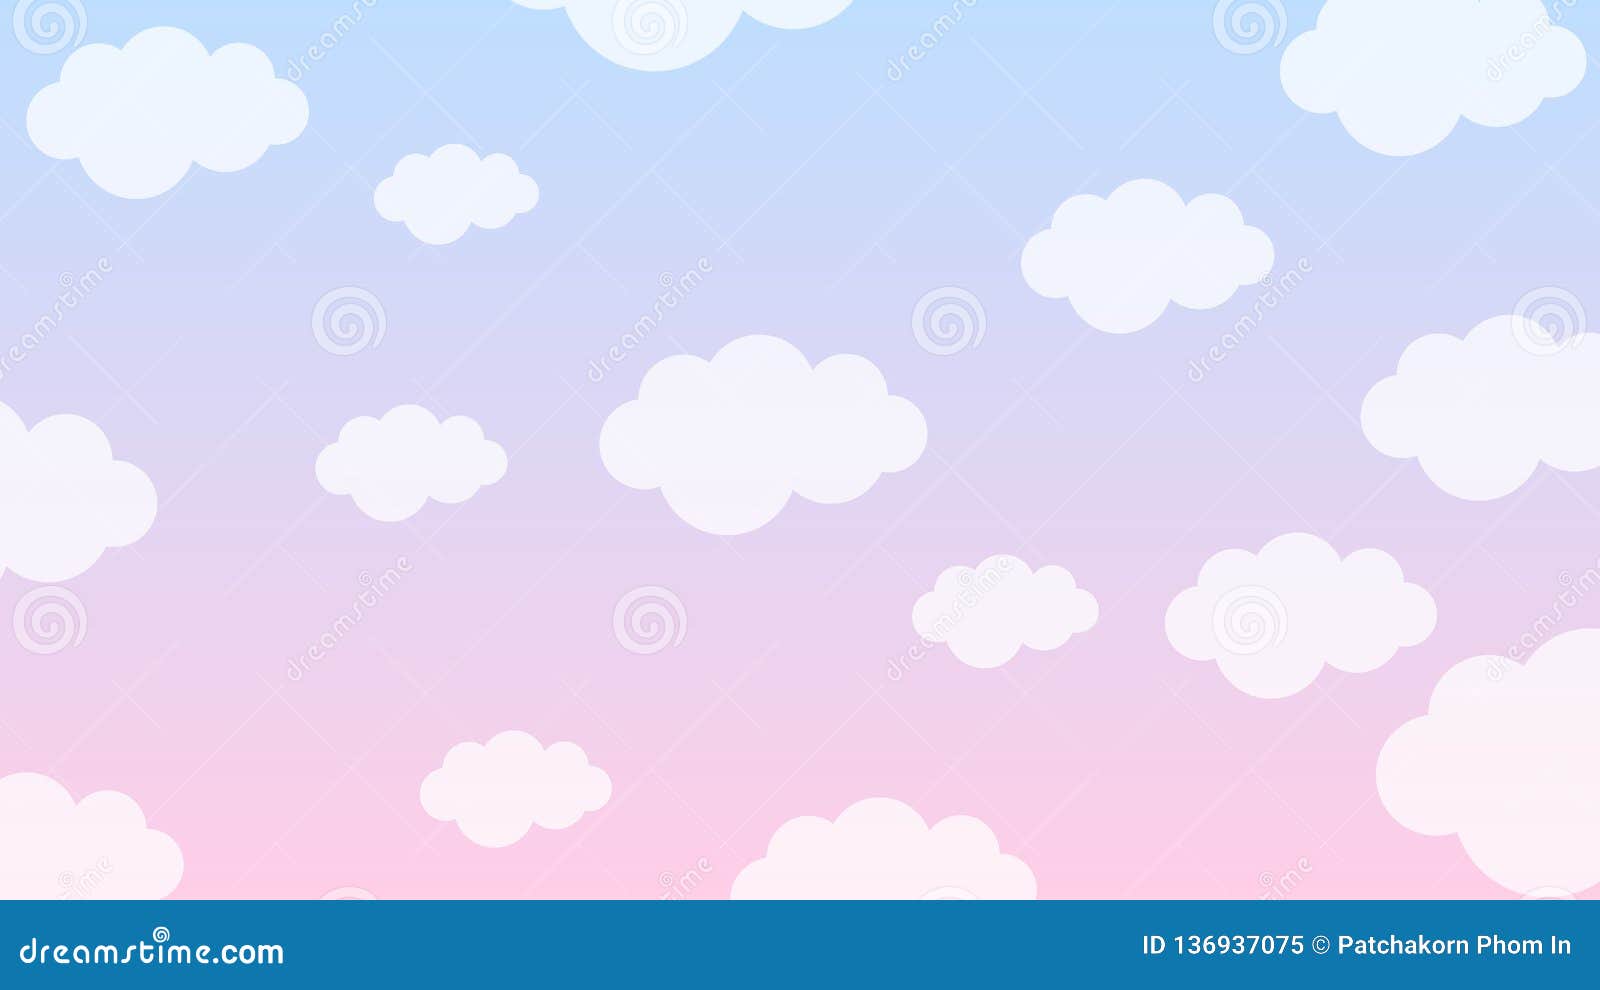 Abstract Pastel Kawaii Funny White Clouds. Seamless Pattern on Blue  Background Stock Illustration - Illustration of pink, graphic: 136937075